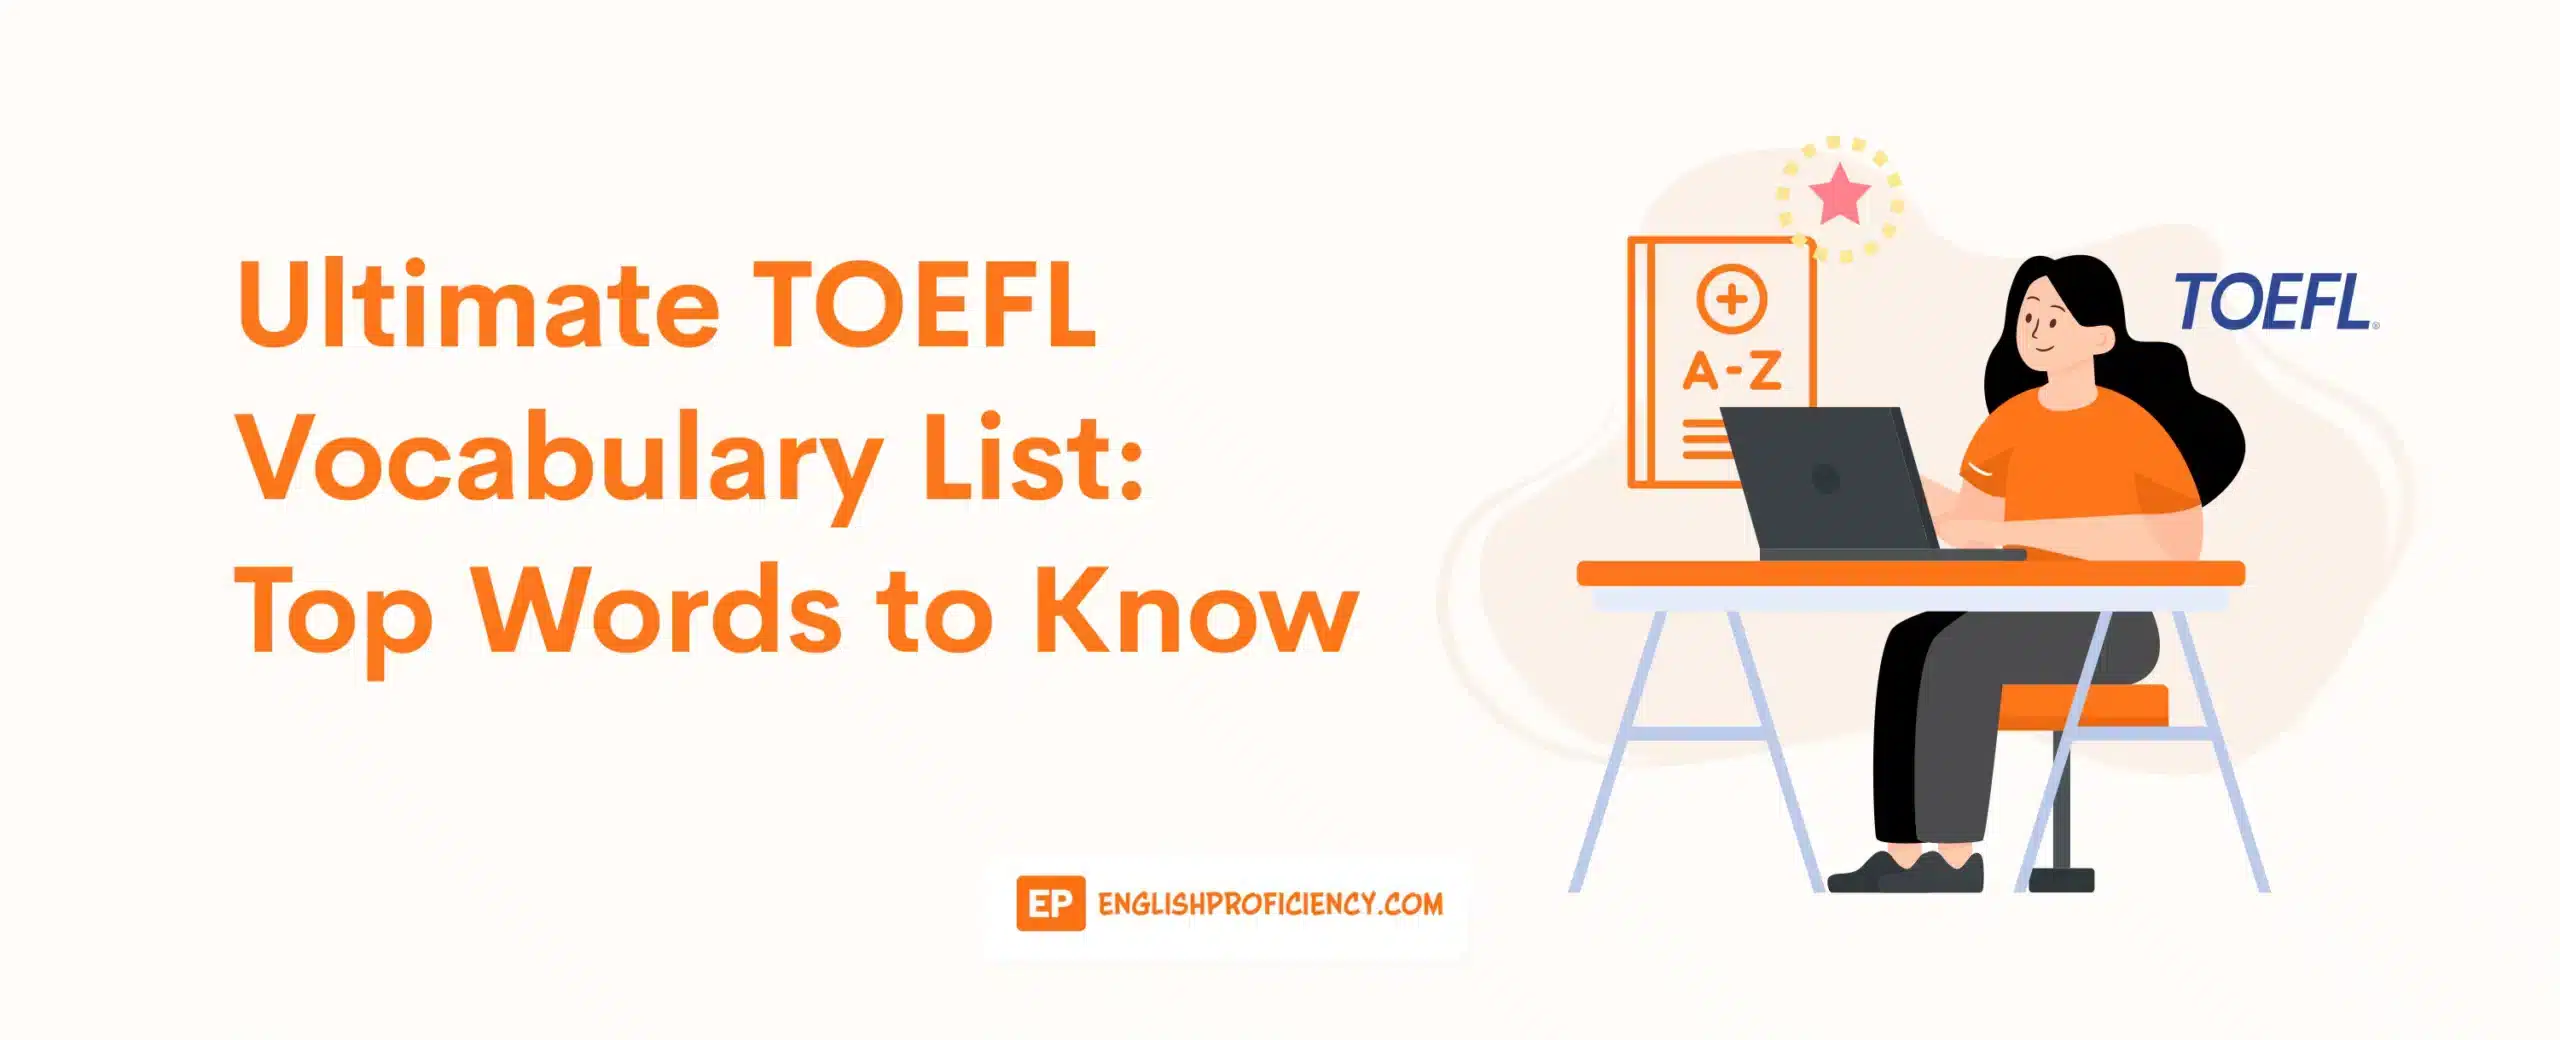 Ultimate TOEFL Vocabulary List Top Words to Know